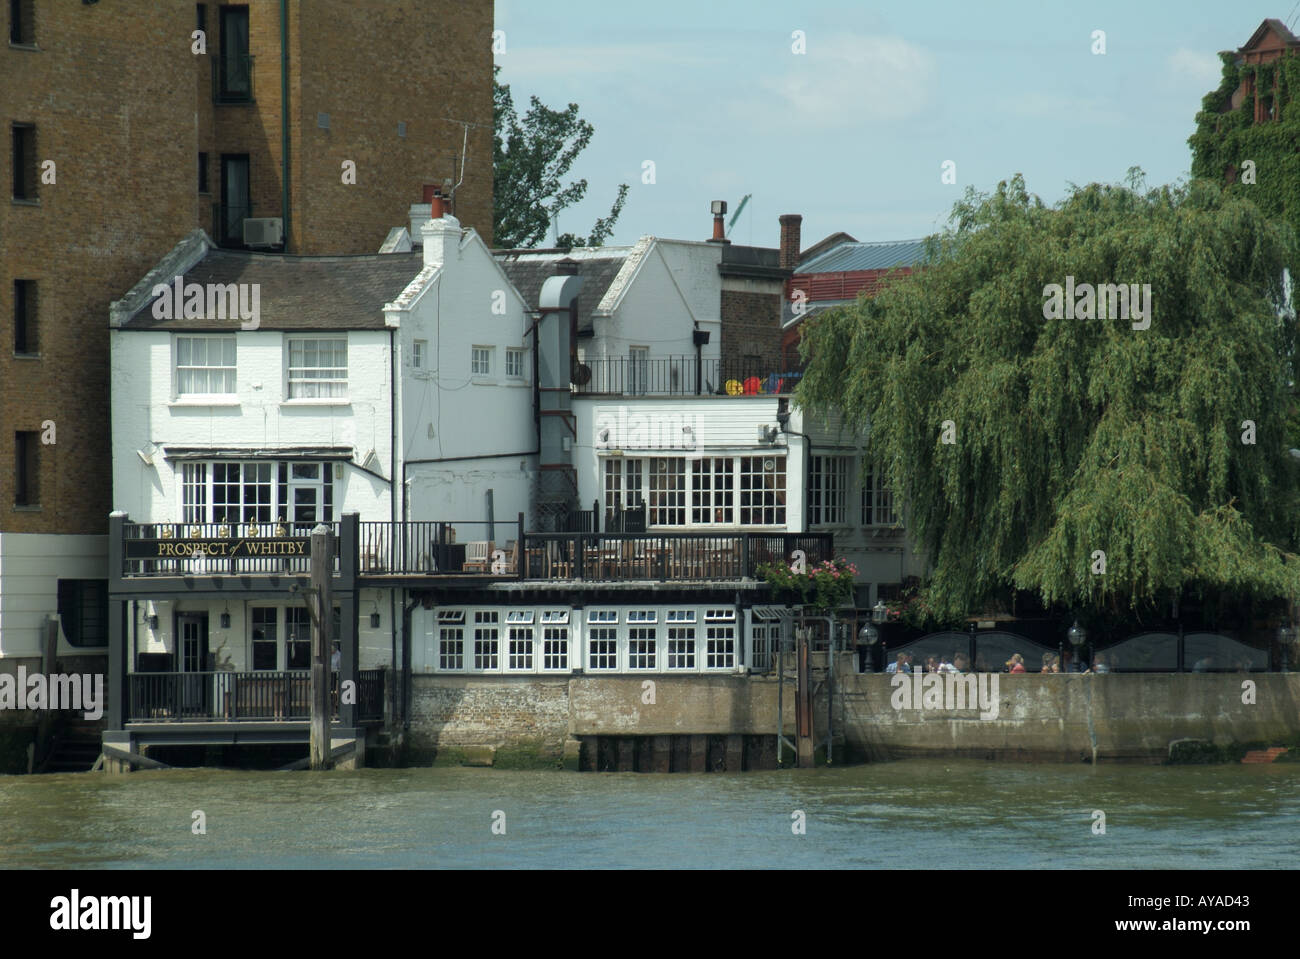 Wapping East London Tower Hamlets river Thames waterside Prospect of Whitby public house Stock Photo